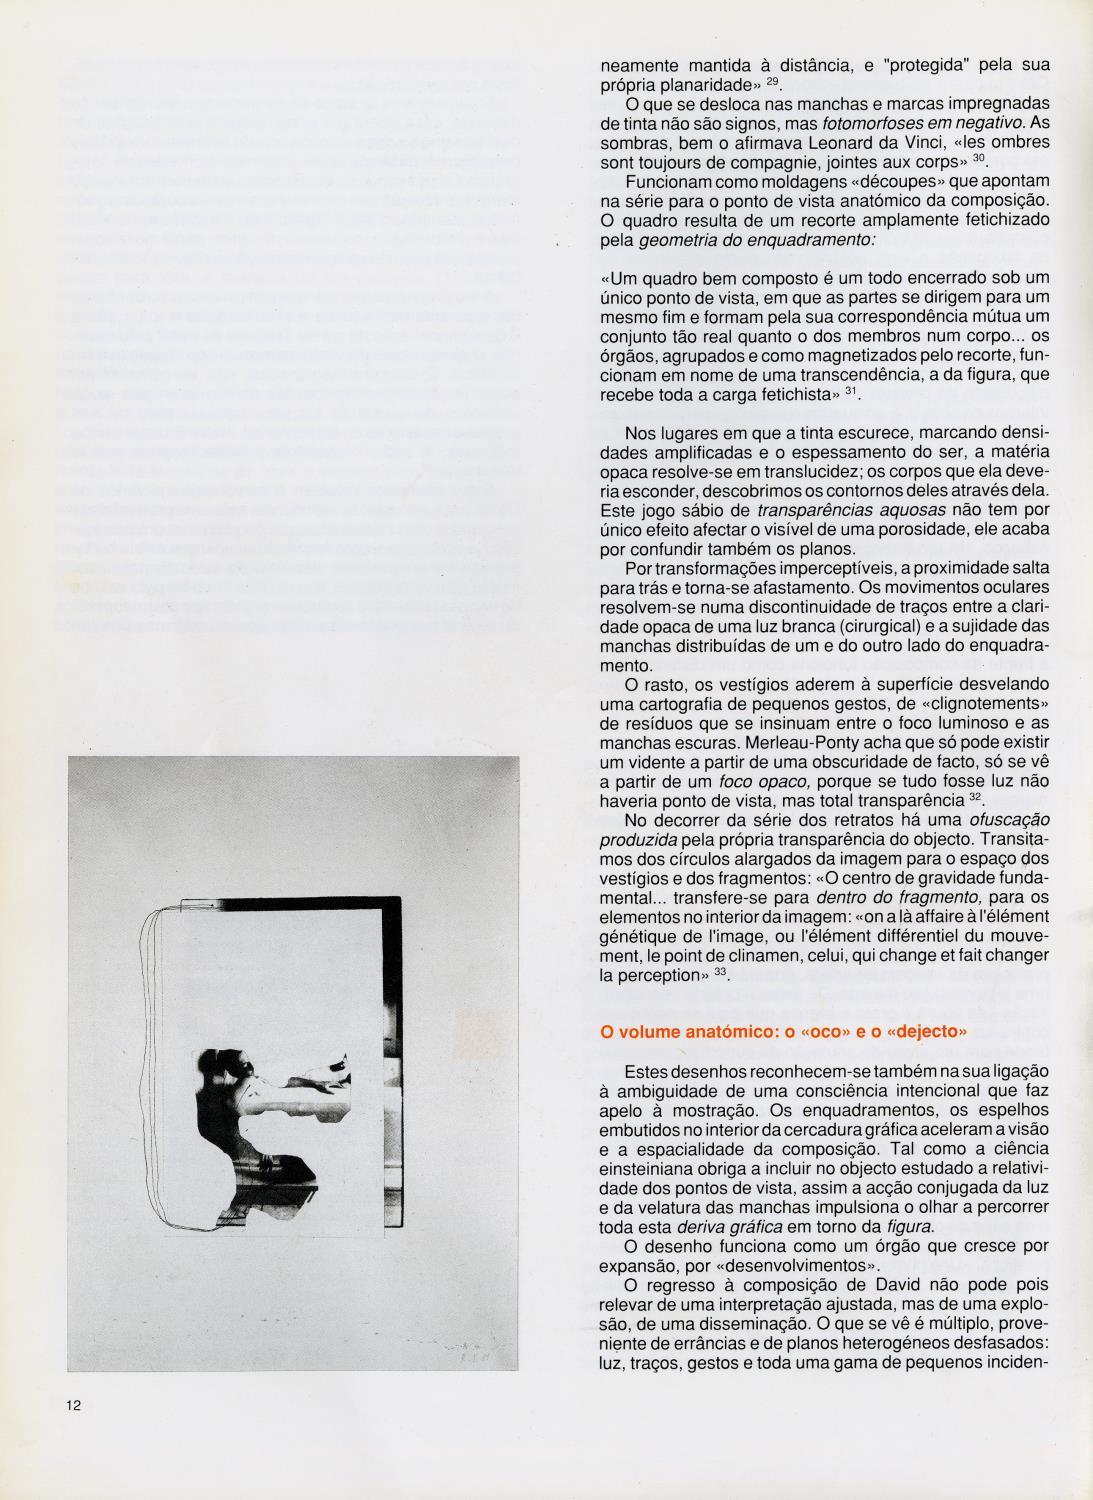 1992_PACL30a_92_p.12